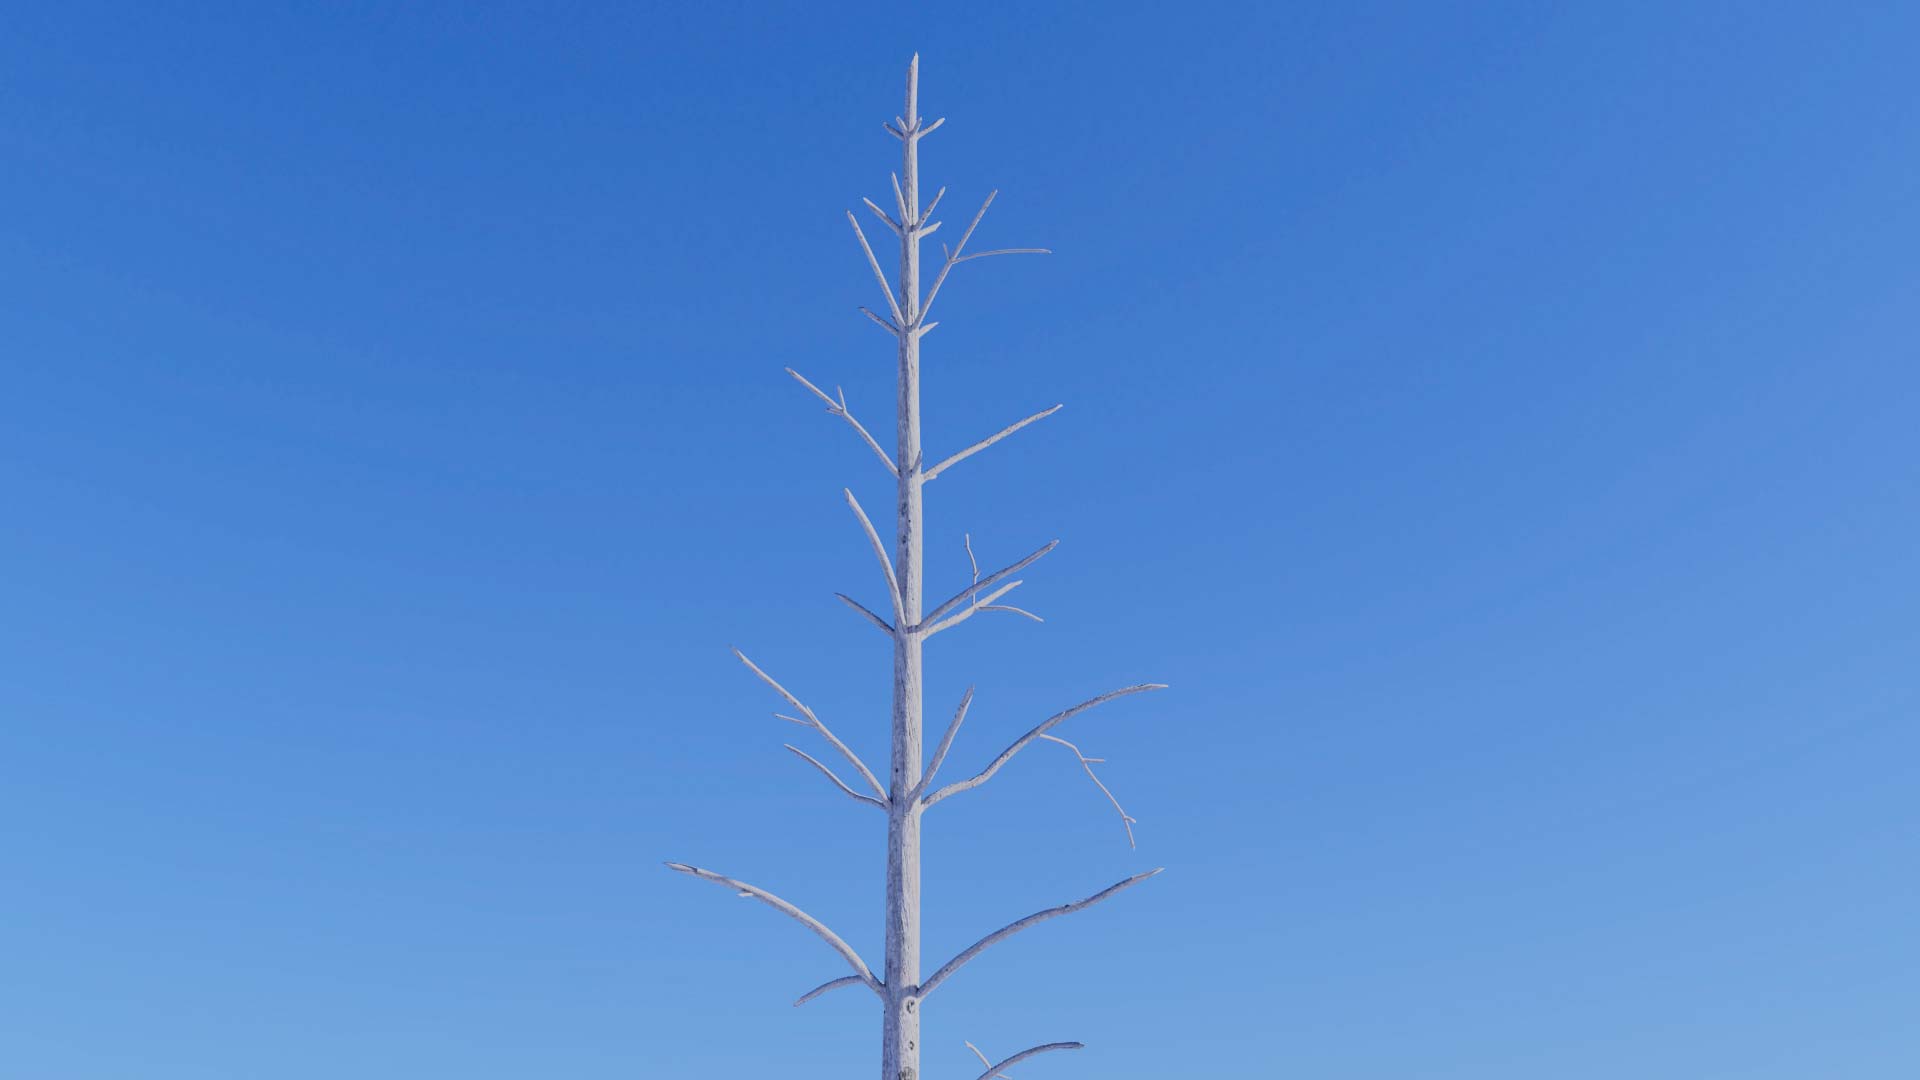 3D model of the Dead Lodgepole pine forest Pinus contorta dead forest close-up